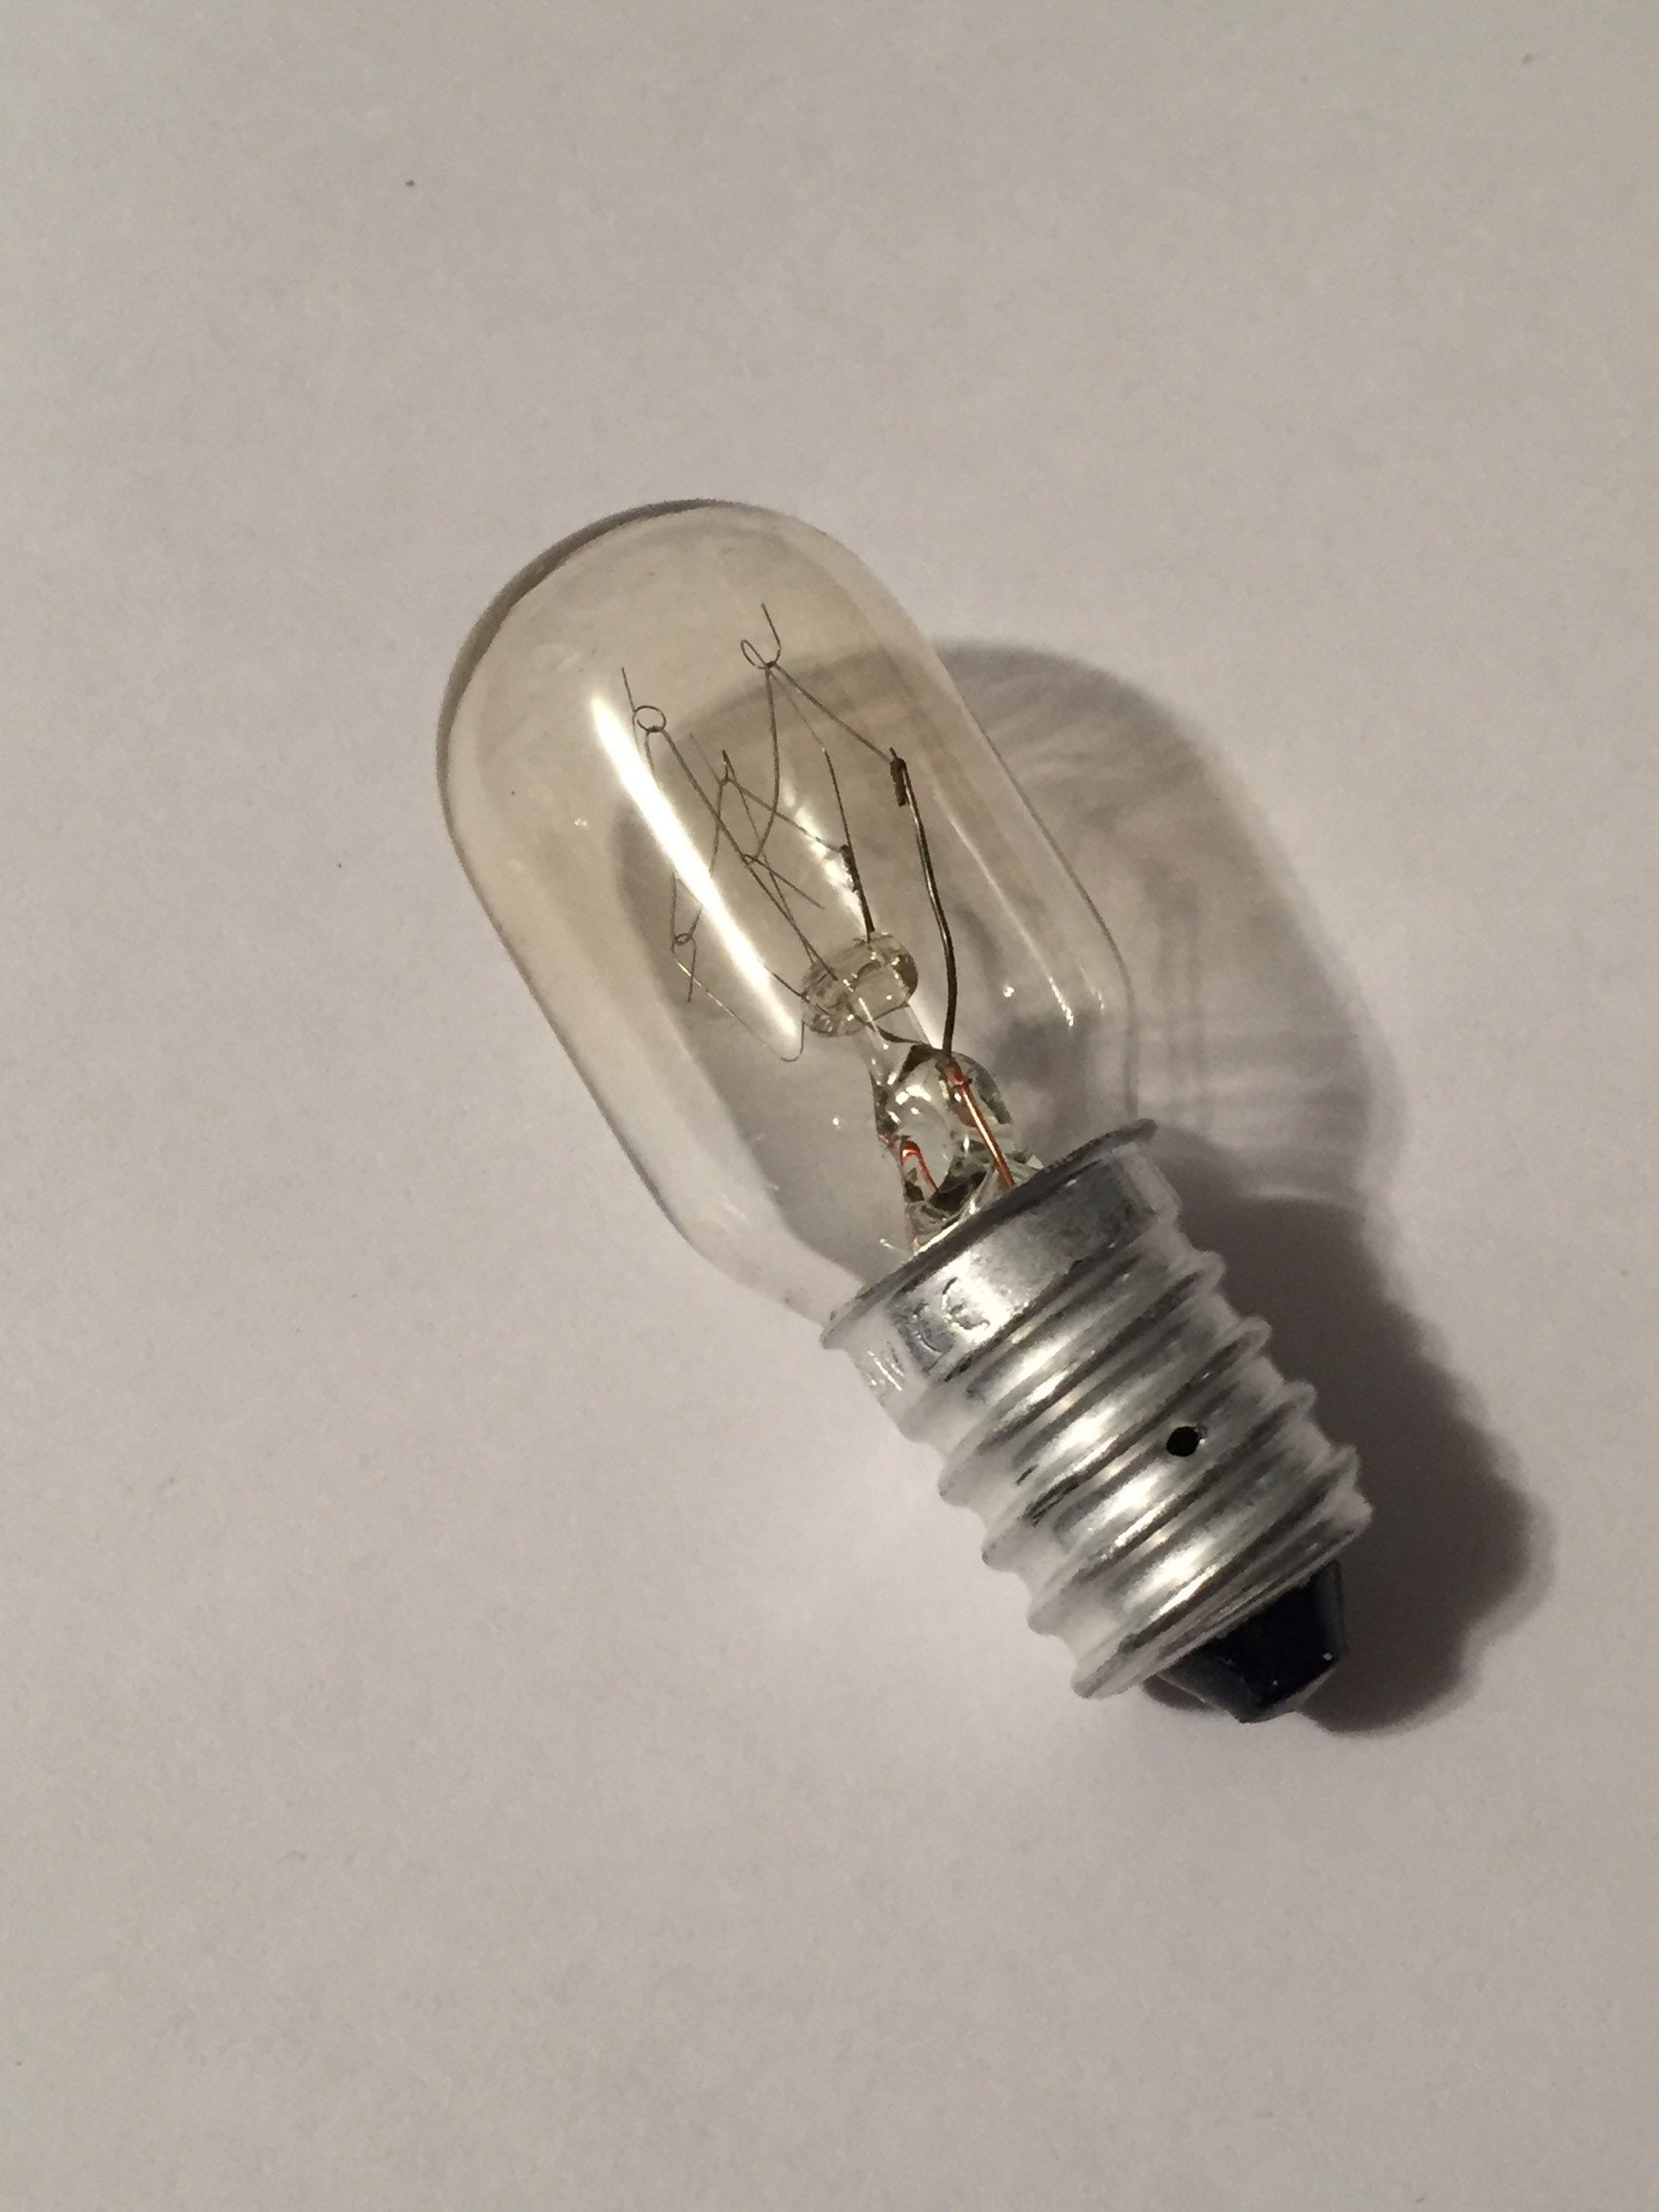 Rooting Replacement Bulb for E12 Lamp 25 Watt - Etsy